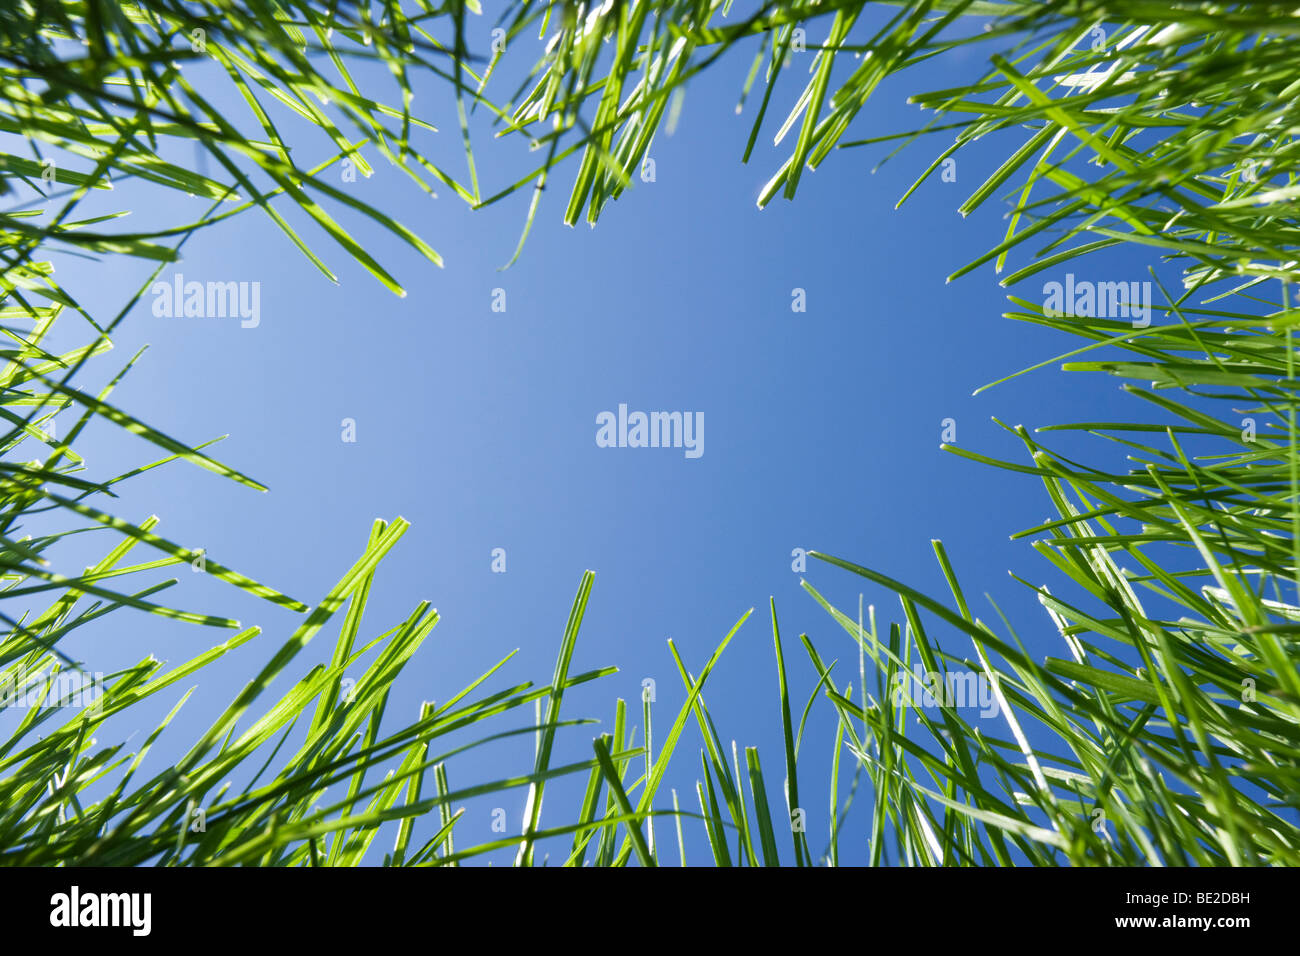 Looking up through grass from ground level. Stock Photo